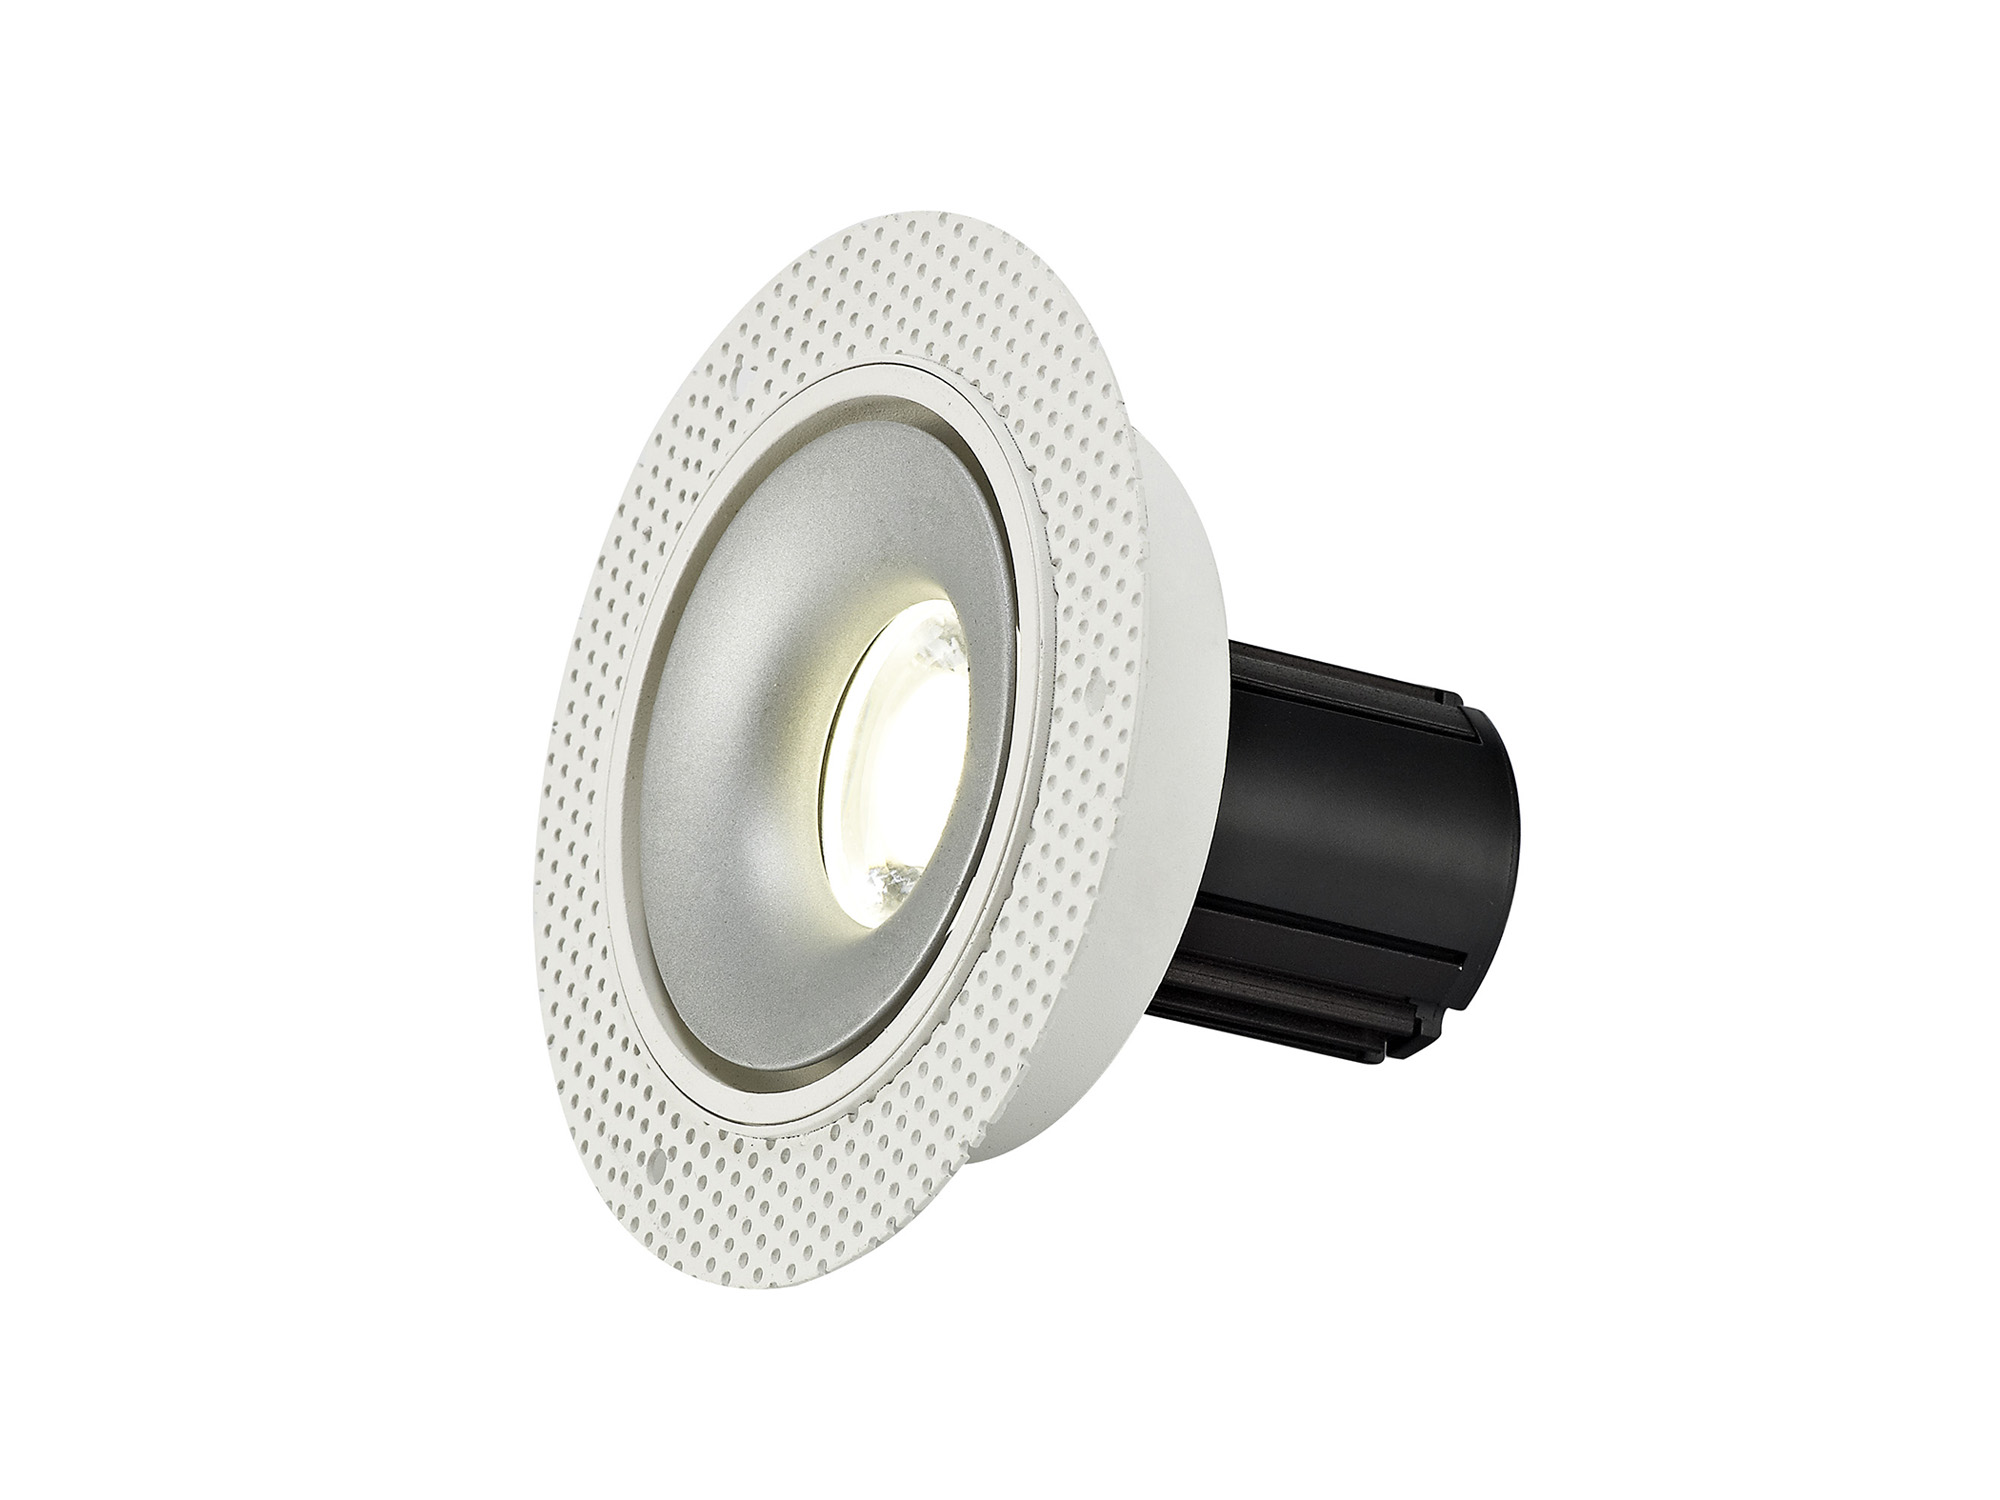 DM201114  Bolor T 10 Tridonic Powered 10W 4000K 810lm 36° CRI>90 LED Engine White/Silver Trimless Fixed Recessed Spotlight; IP20